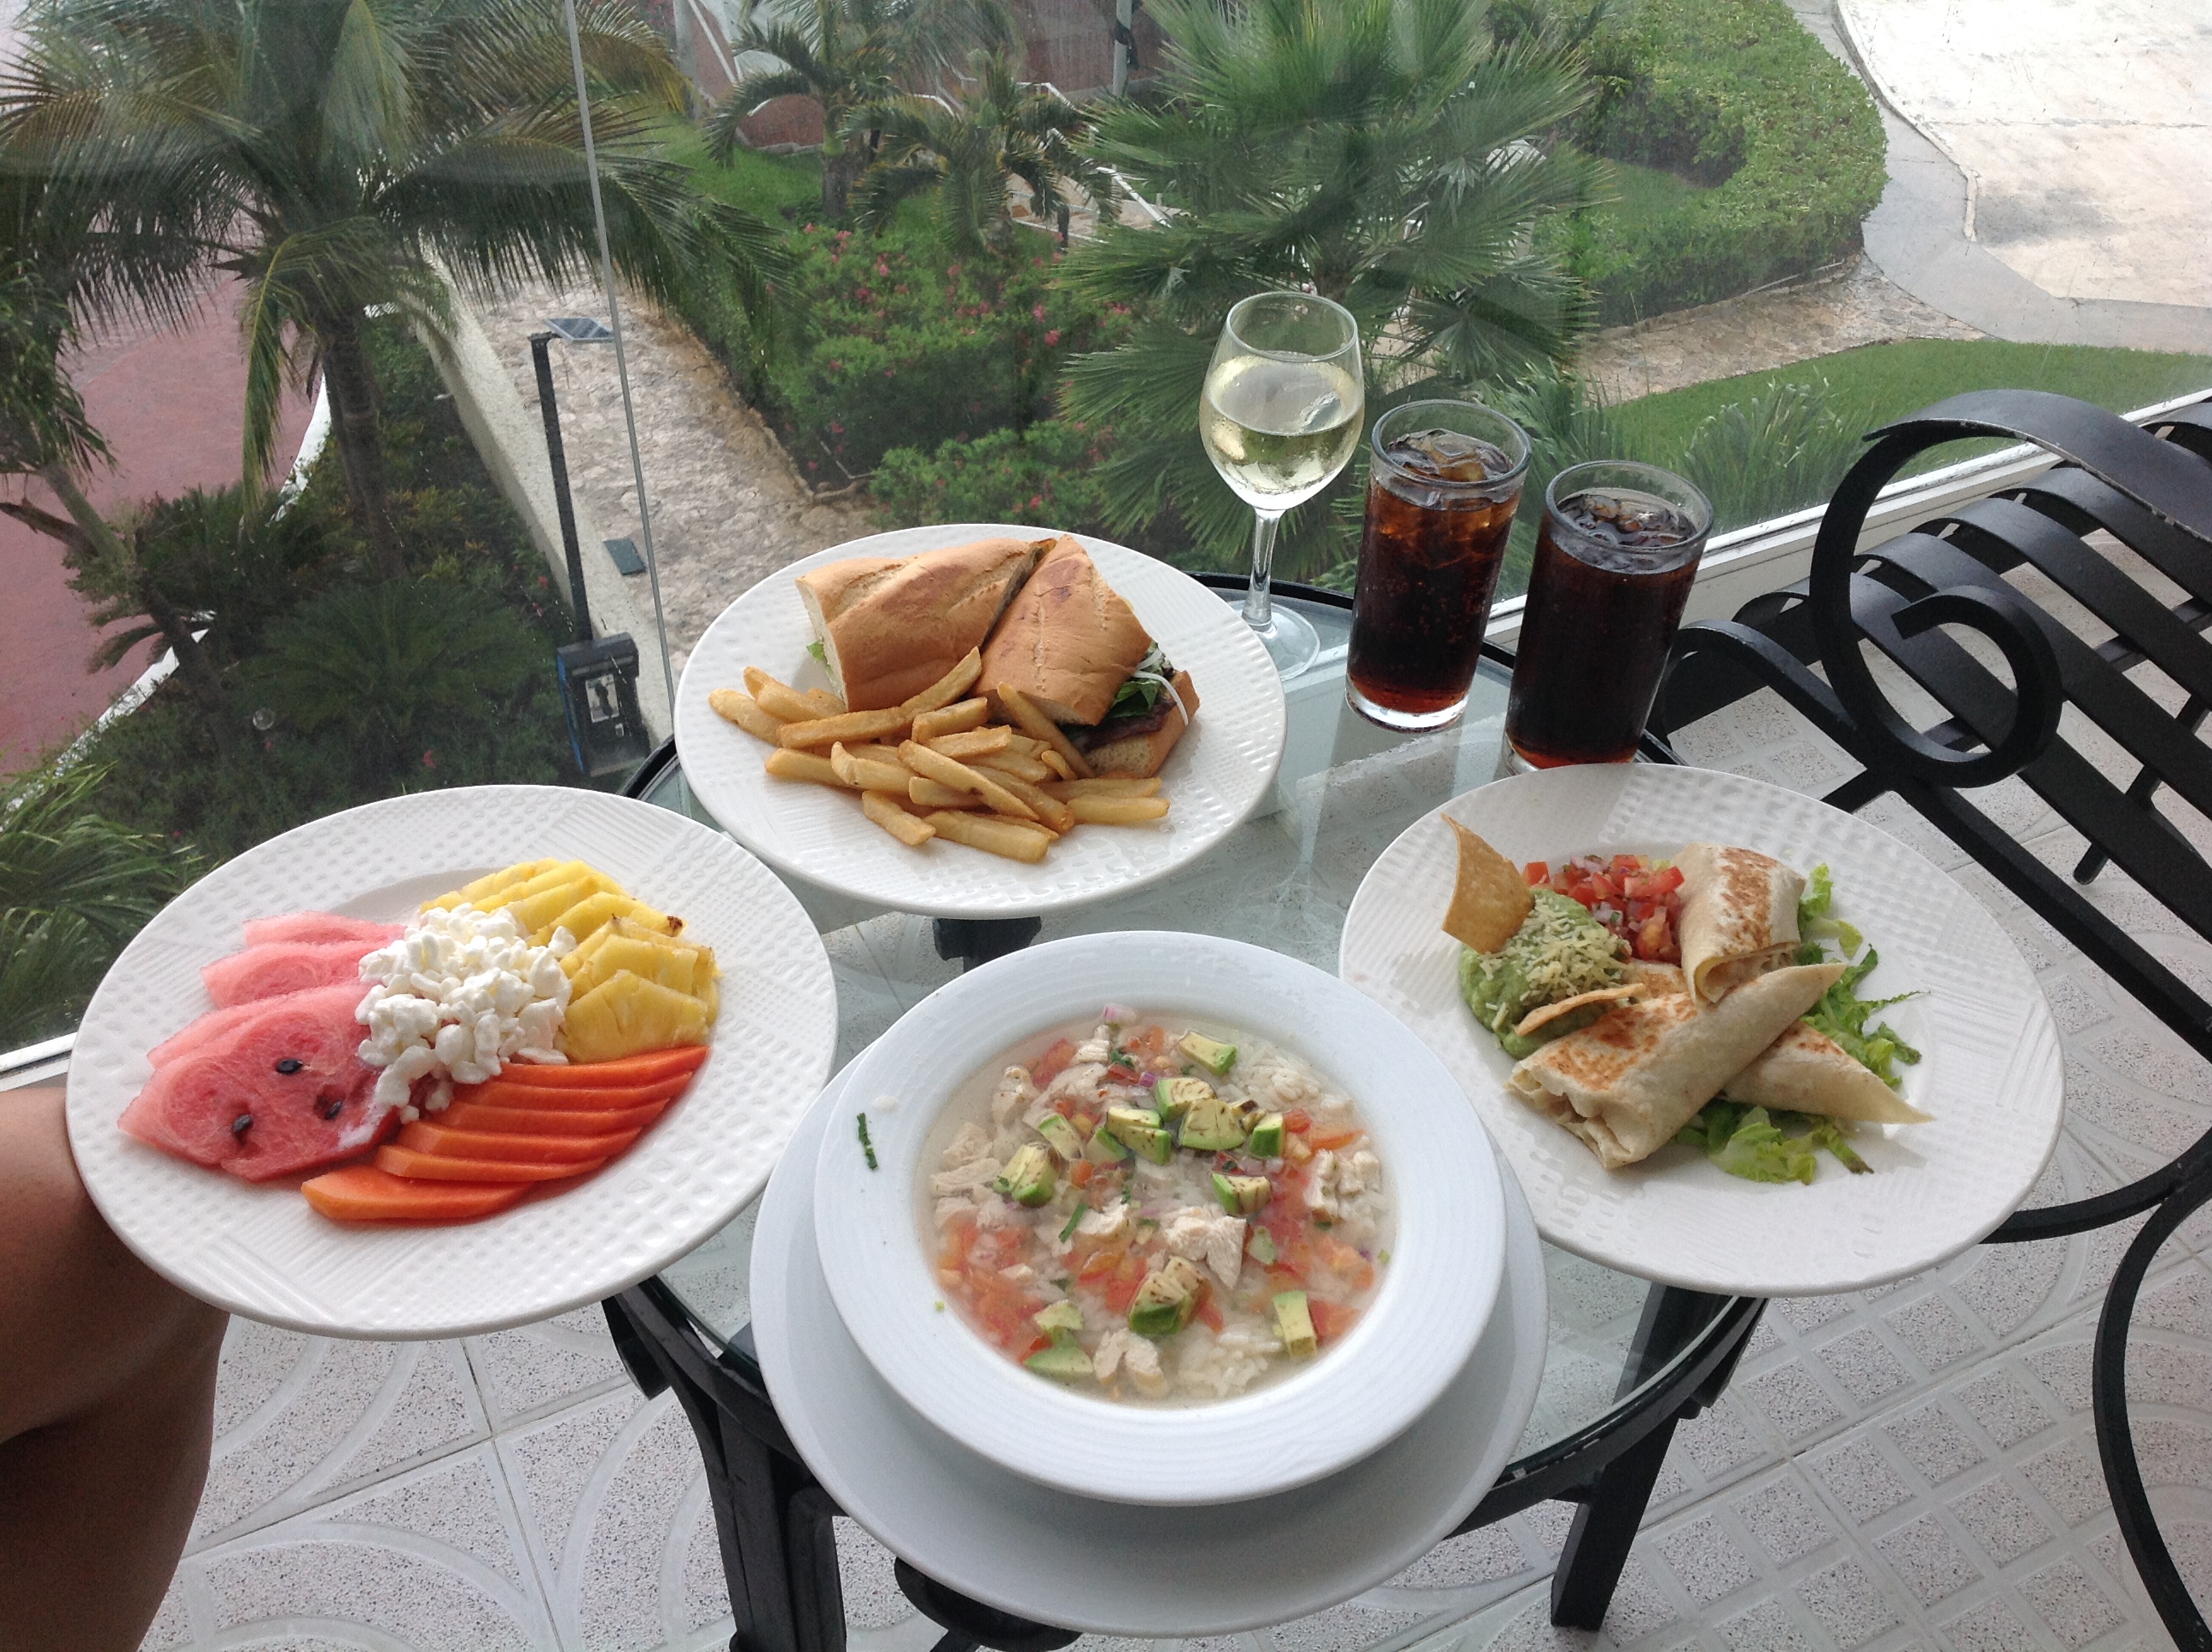 we totally got spoiled during our stay..room service galore!